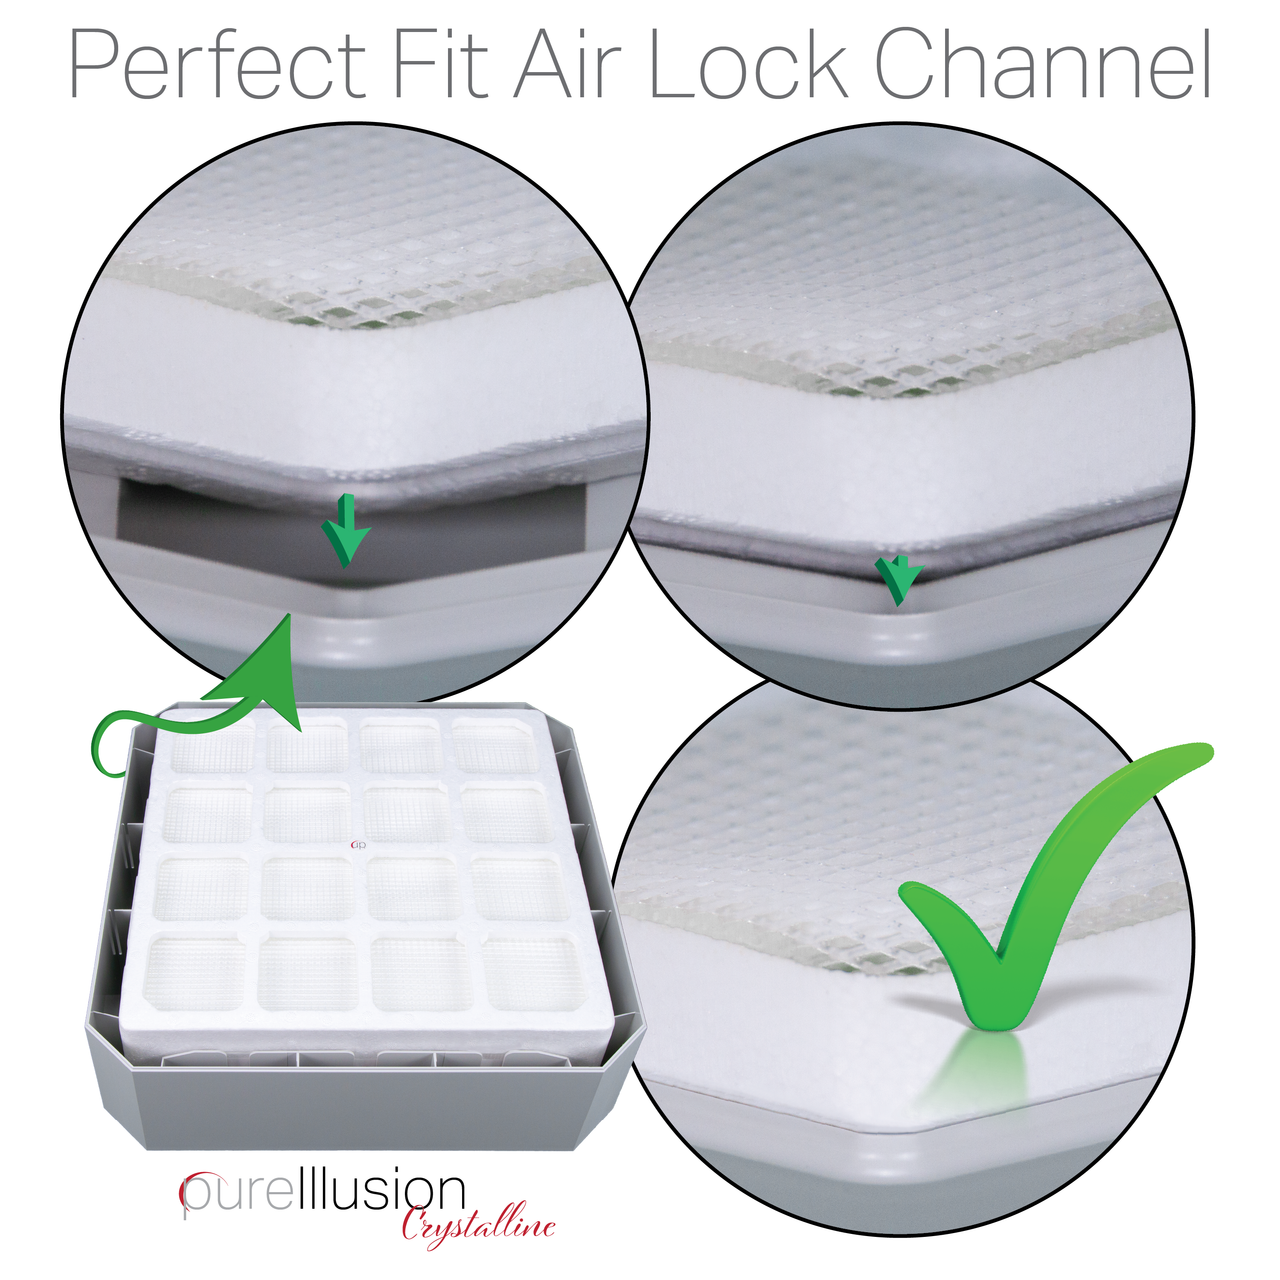 Details matter.  PureIllusion provides detailed instructions on proper airlock channel installation.  PureIllusion Crystalline Replacement Filter Bundle for IQAir HealthPro series air purifiers.